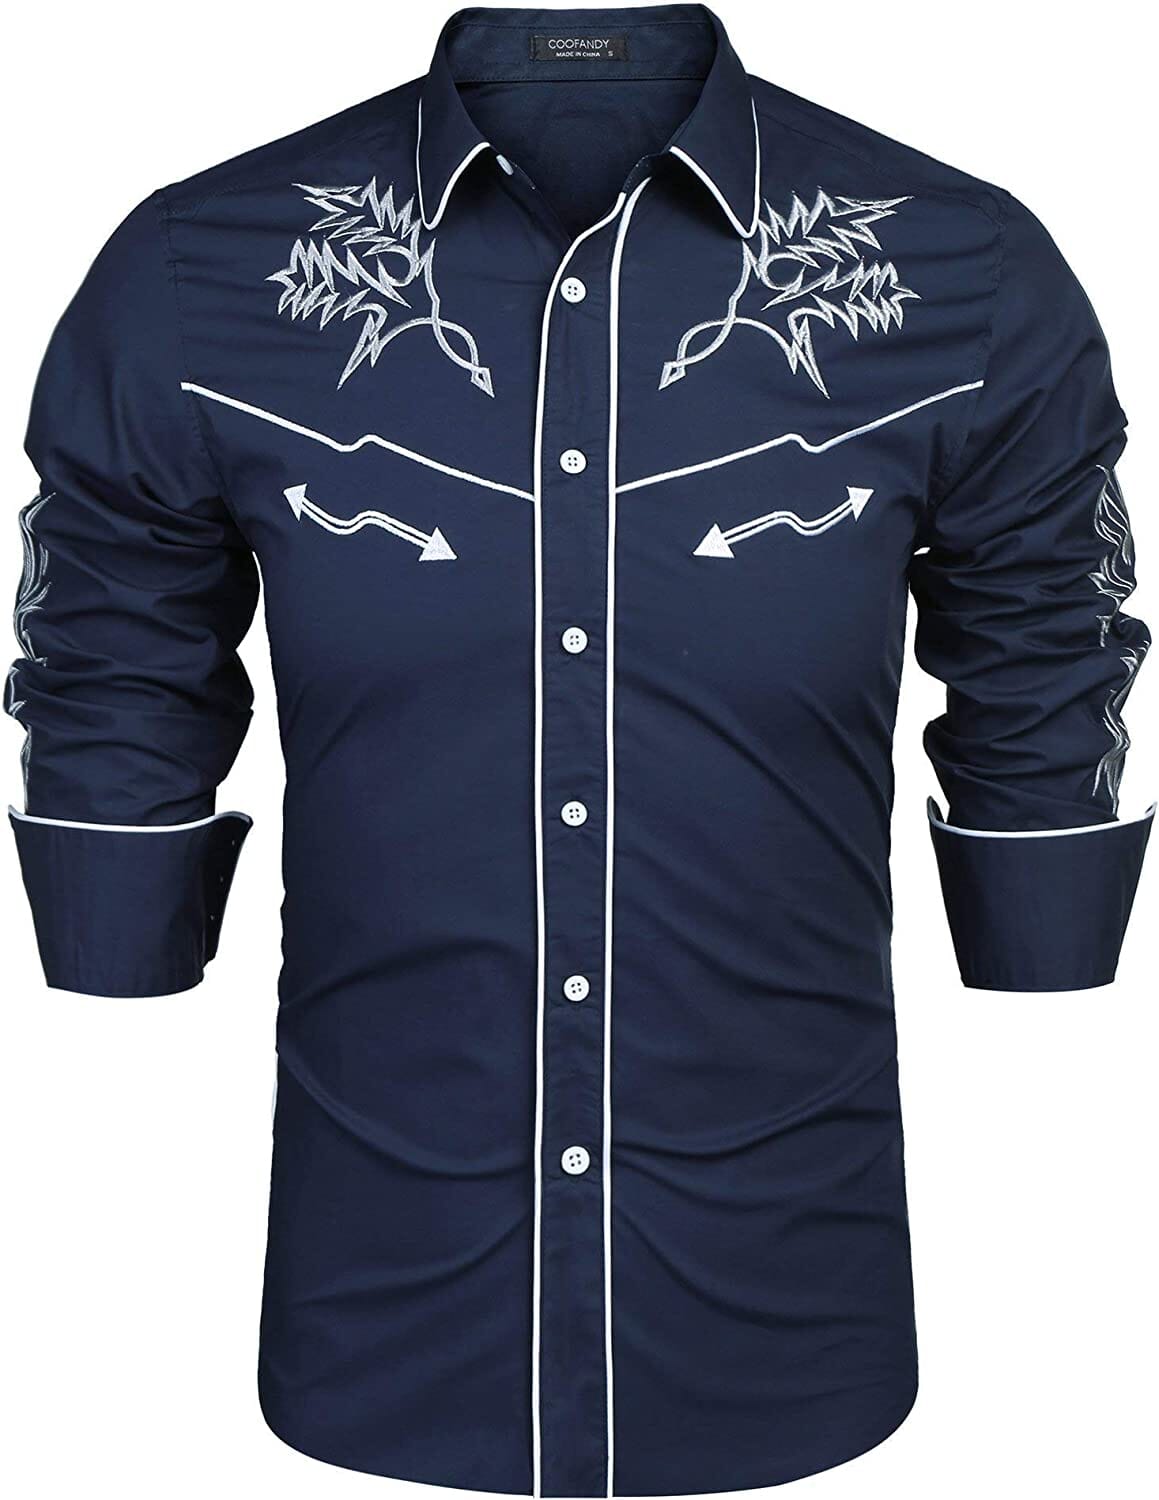 Western Cowboy Embroidered Button Down Cotton Shirt (US Only) Shirts COOFANDY Store Blue S 